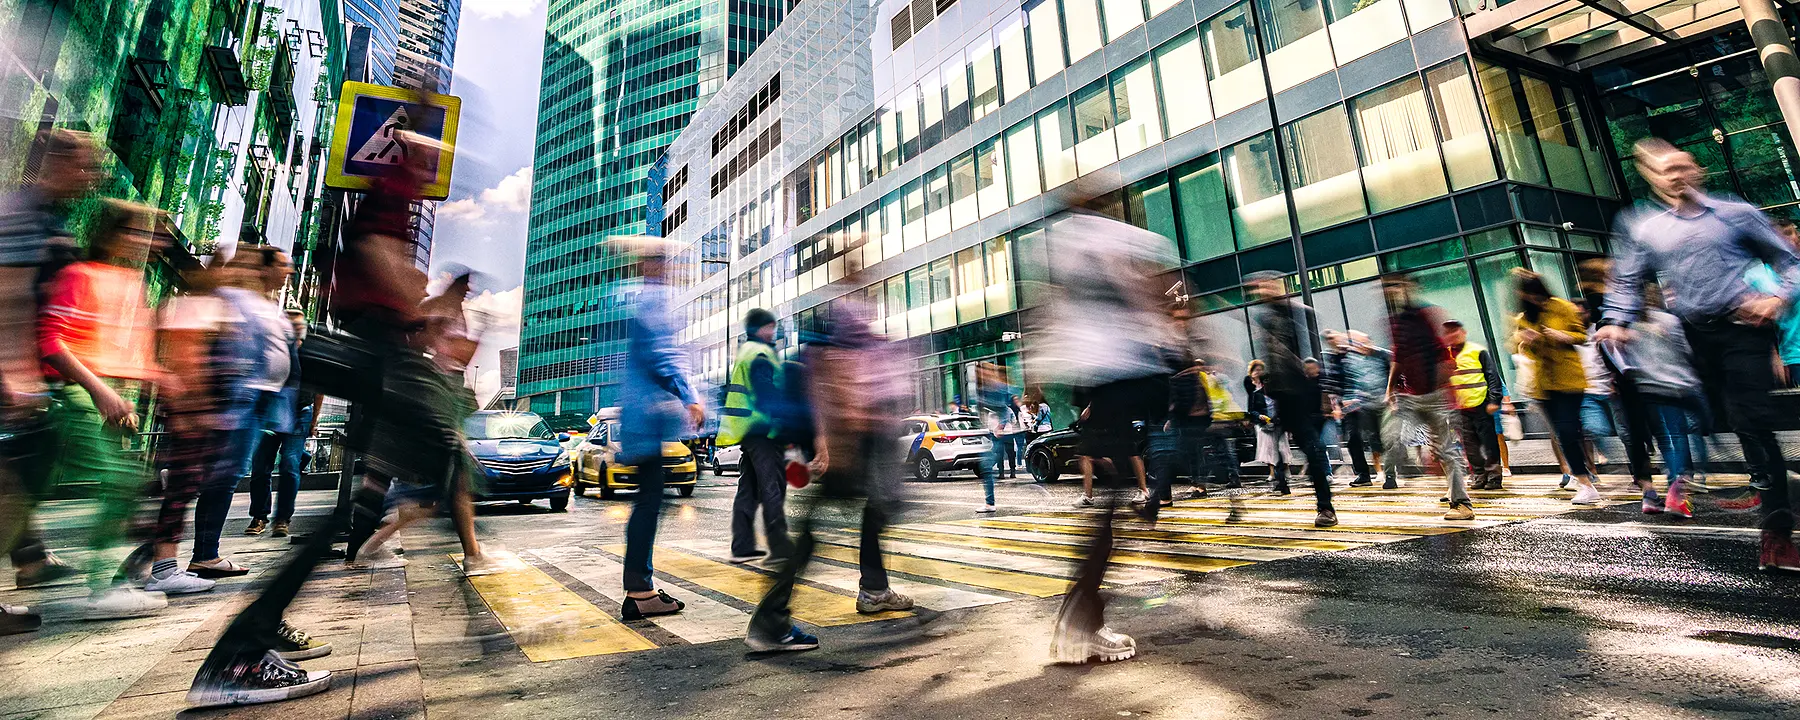 An evening city scene with pedestrians crossing a busy intersection.